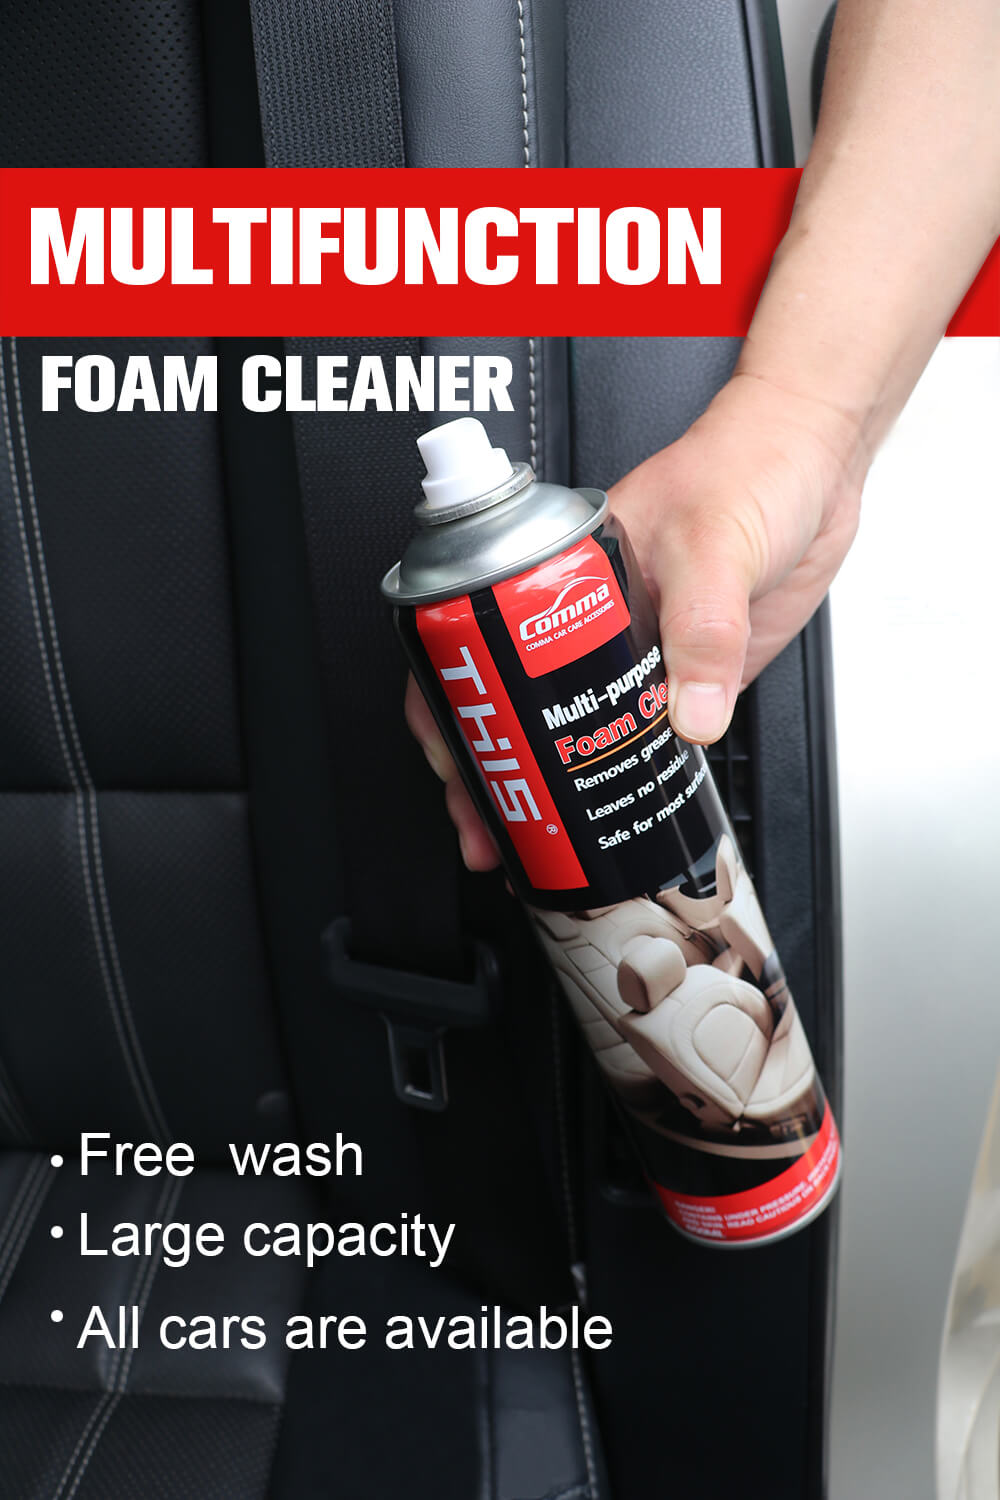 All Purpose Foam Cleaner Manufacturer-15 Years Experience